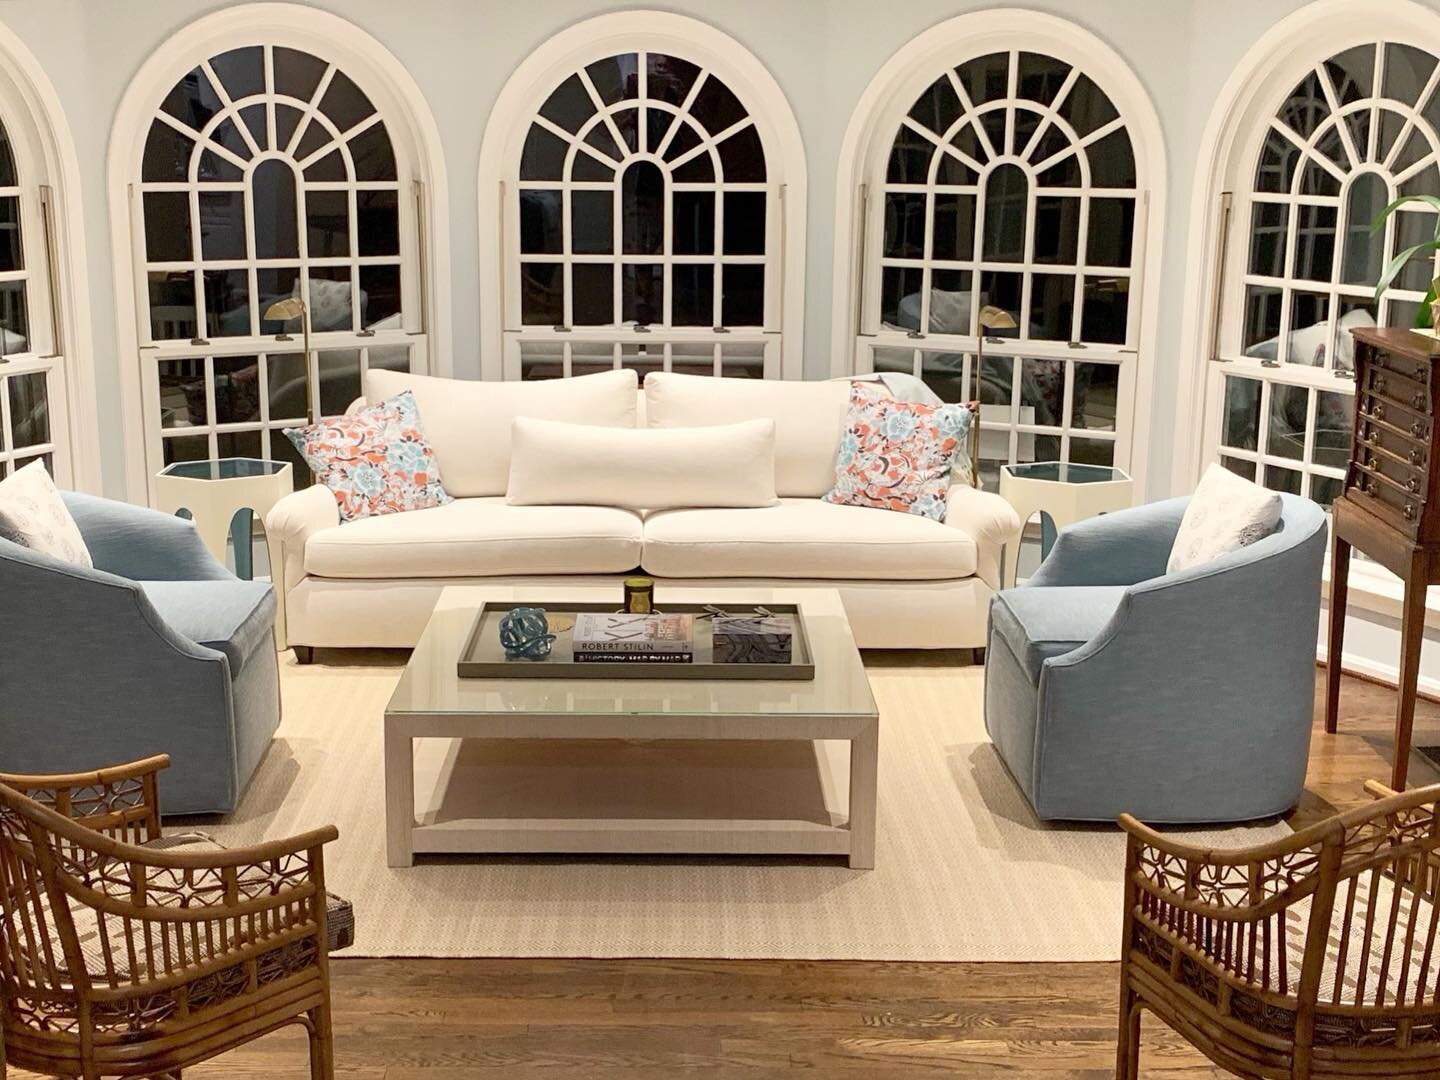 We love when clients send us pictures of their beautiful spaces being enjoyed- like this serene sunroom at night before it&rsquo;s first house party! #KTIALX #kristintryinteriors #extraordinaryalx #maketheeverydayextraordinary #sunroom #interiordesig